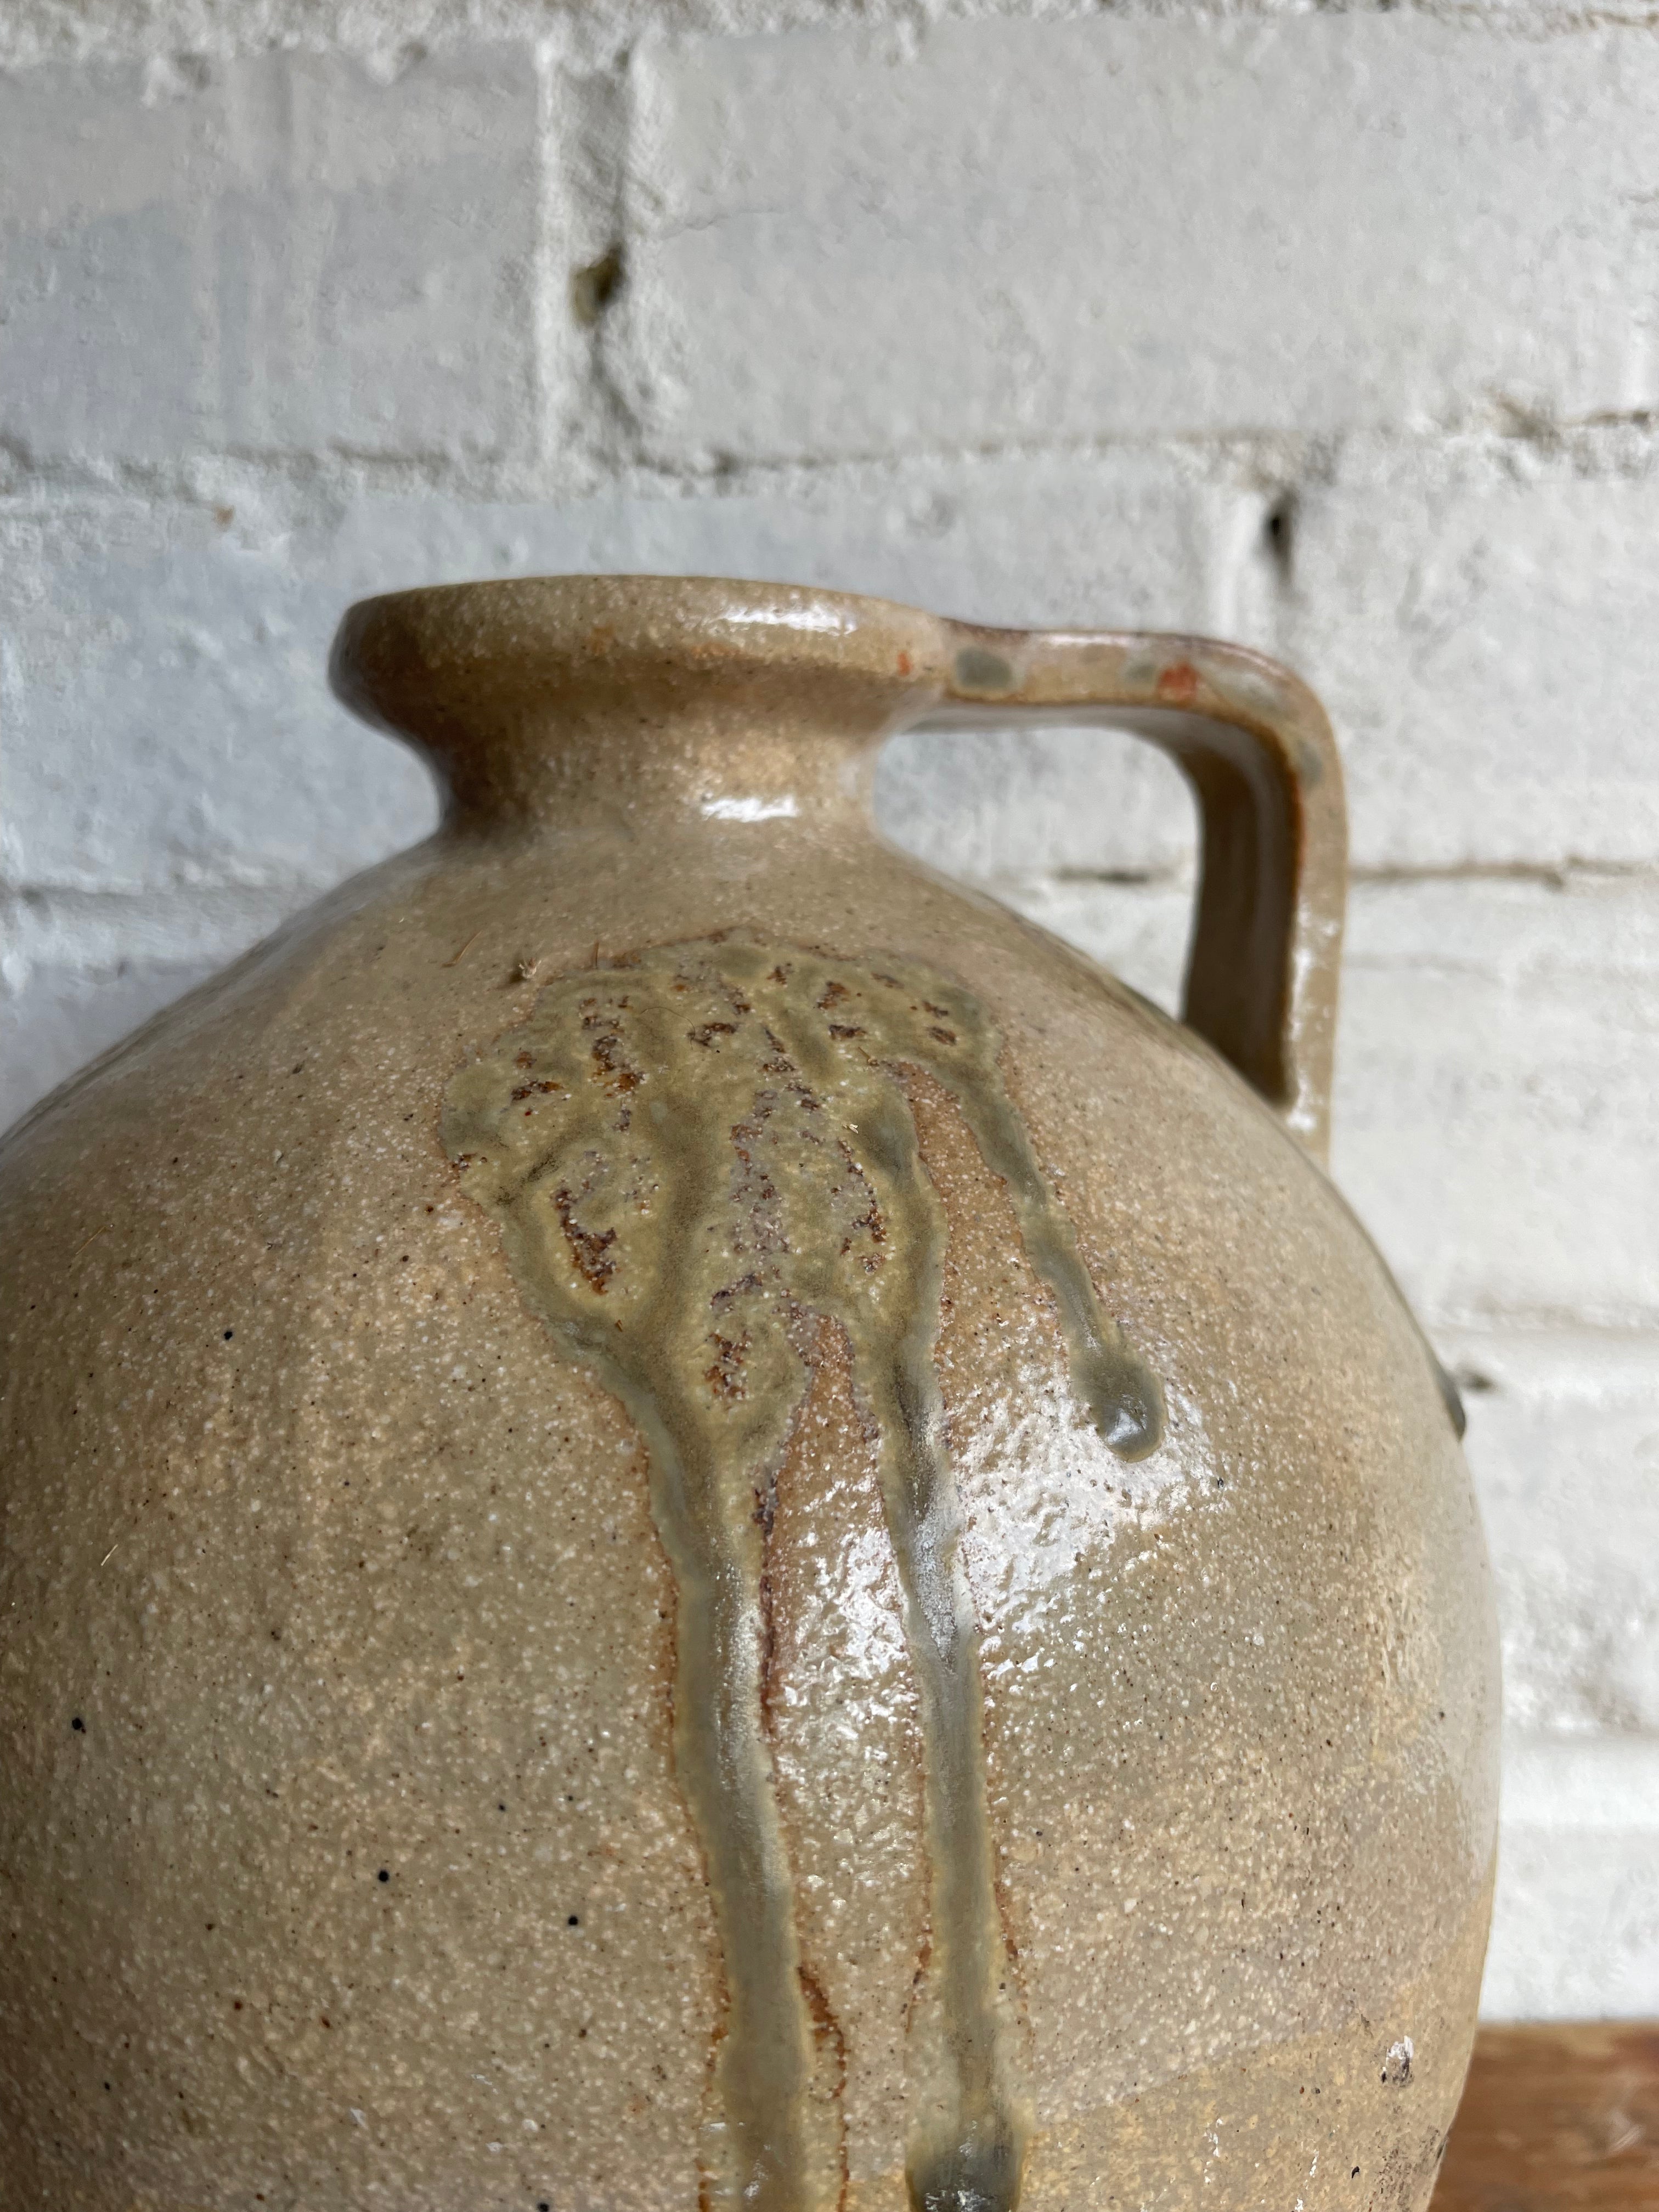 Earthenware Vase with Drip Paint detail